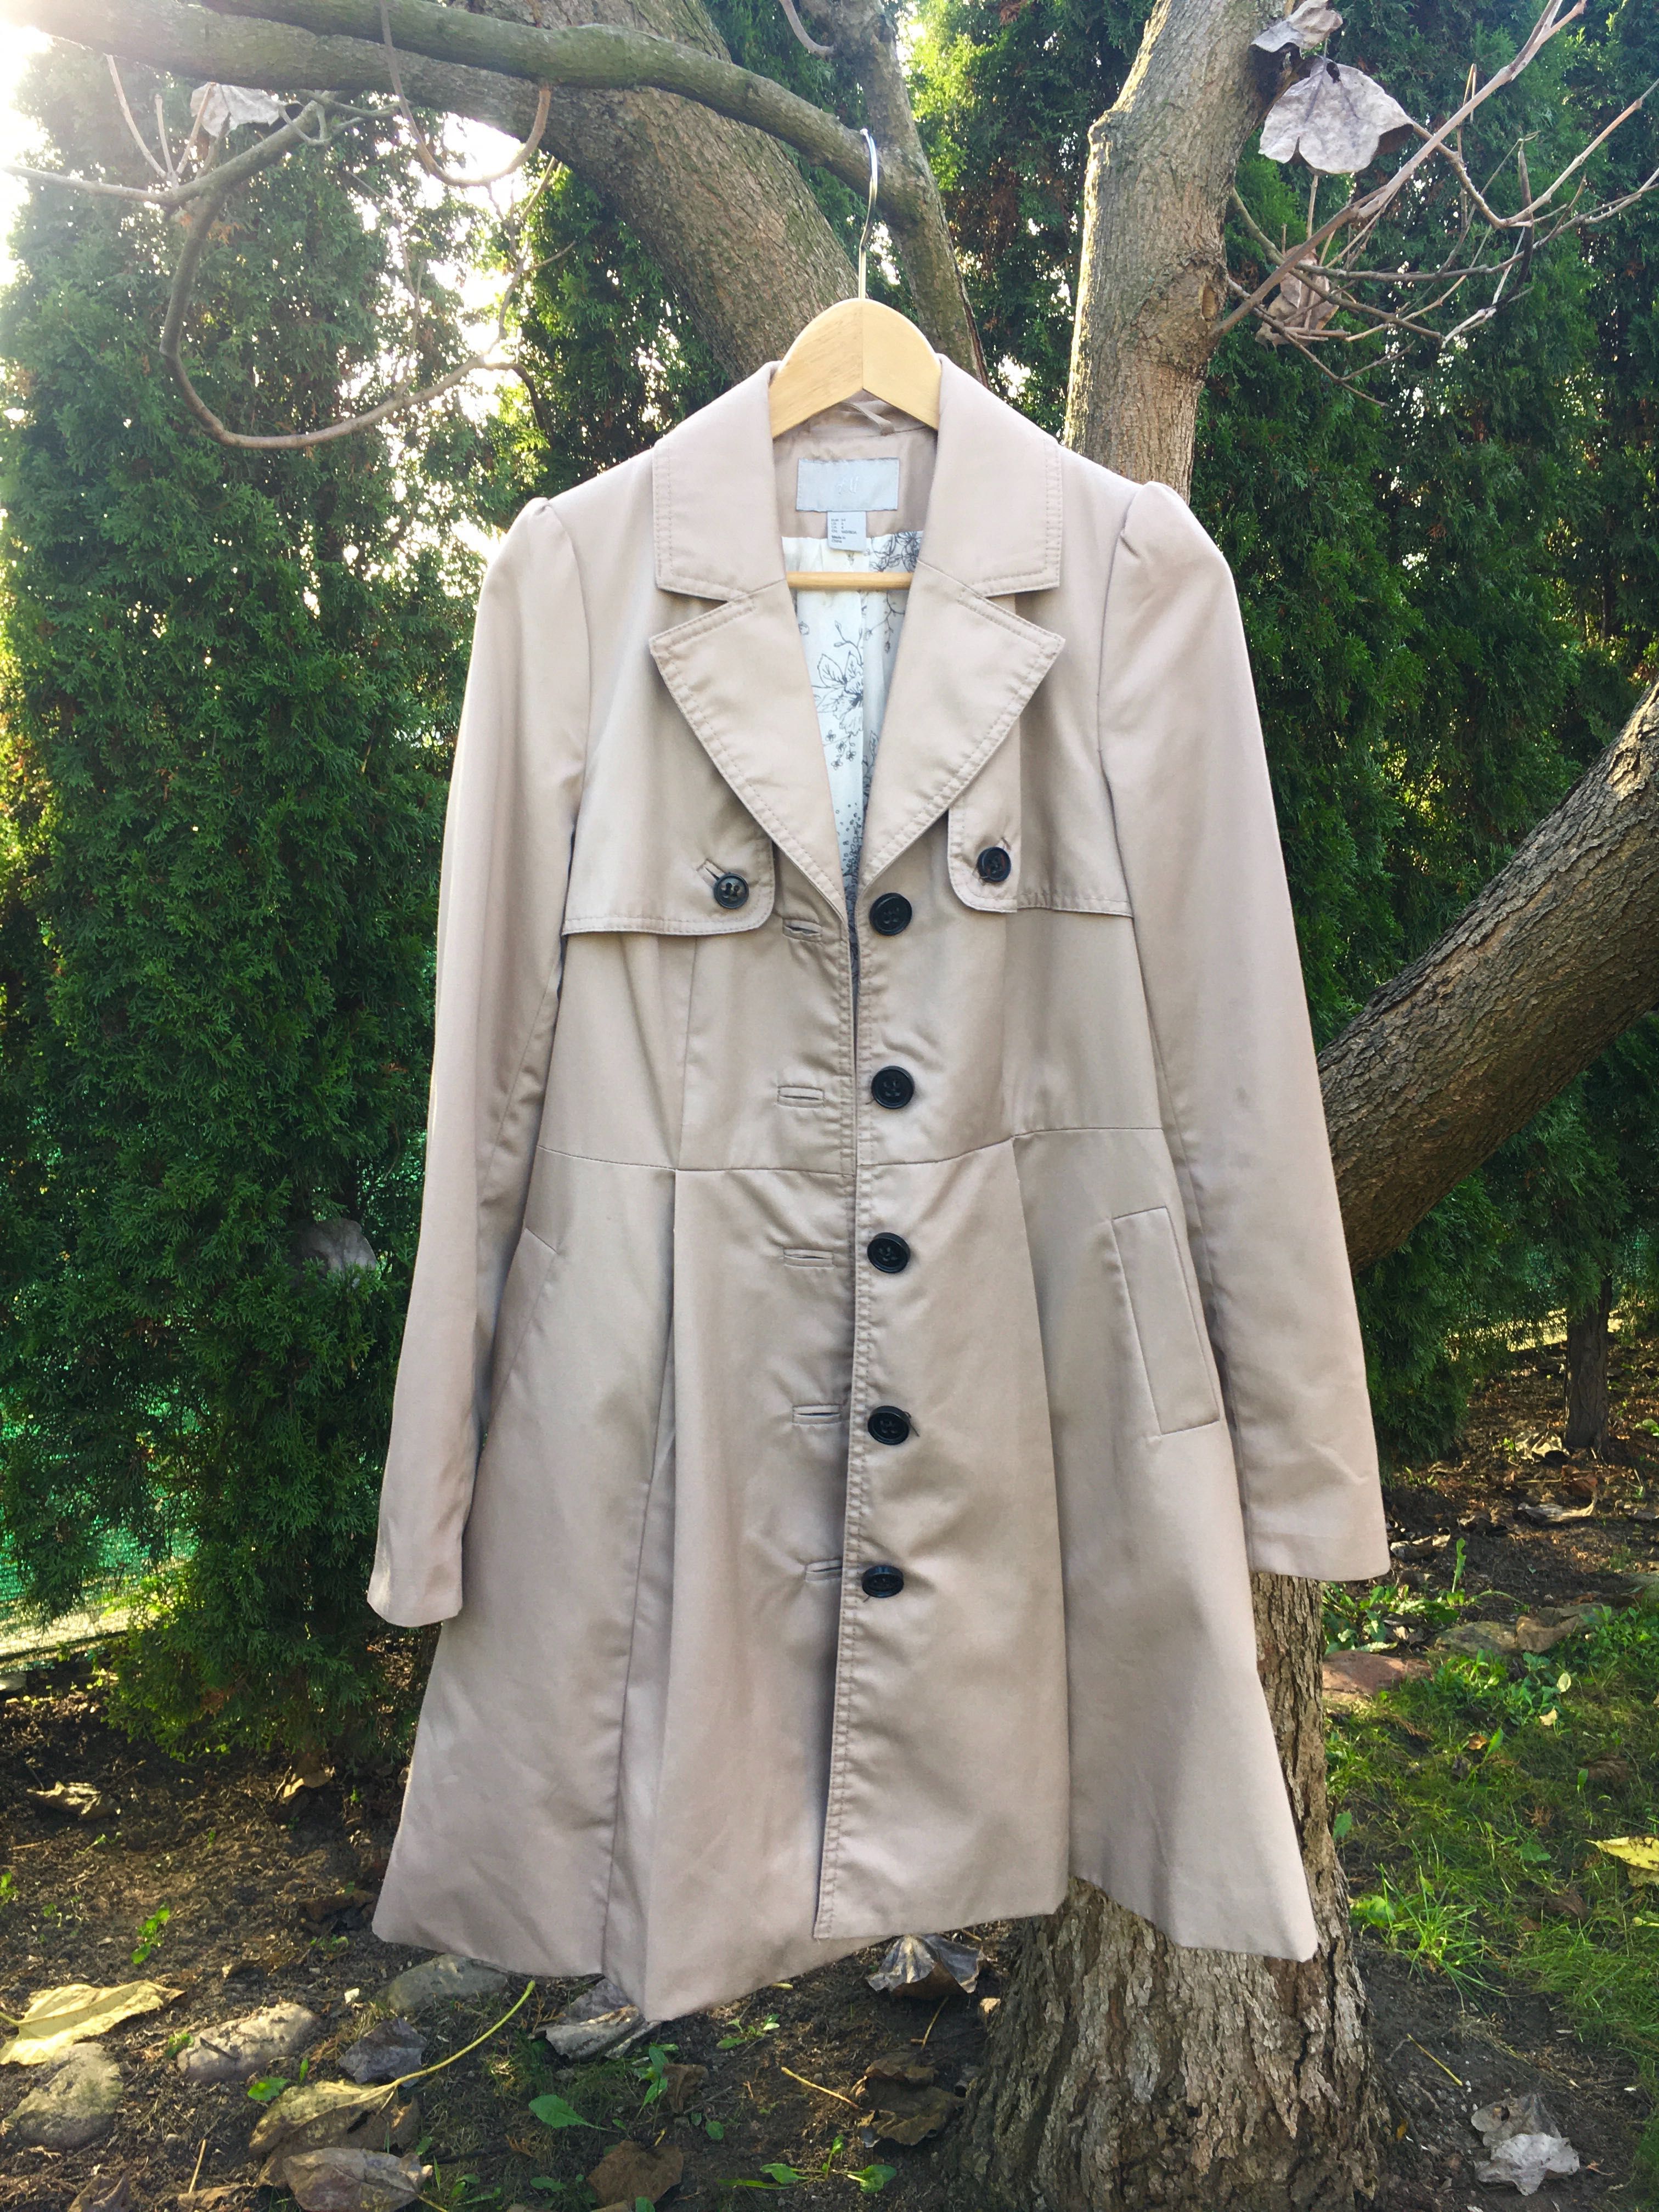 Prochowiec/trench/coat beż/beżowy/taupe/nude/beige H&M 34/36/38 XS/S/M